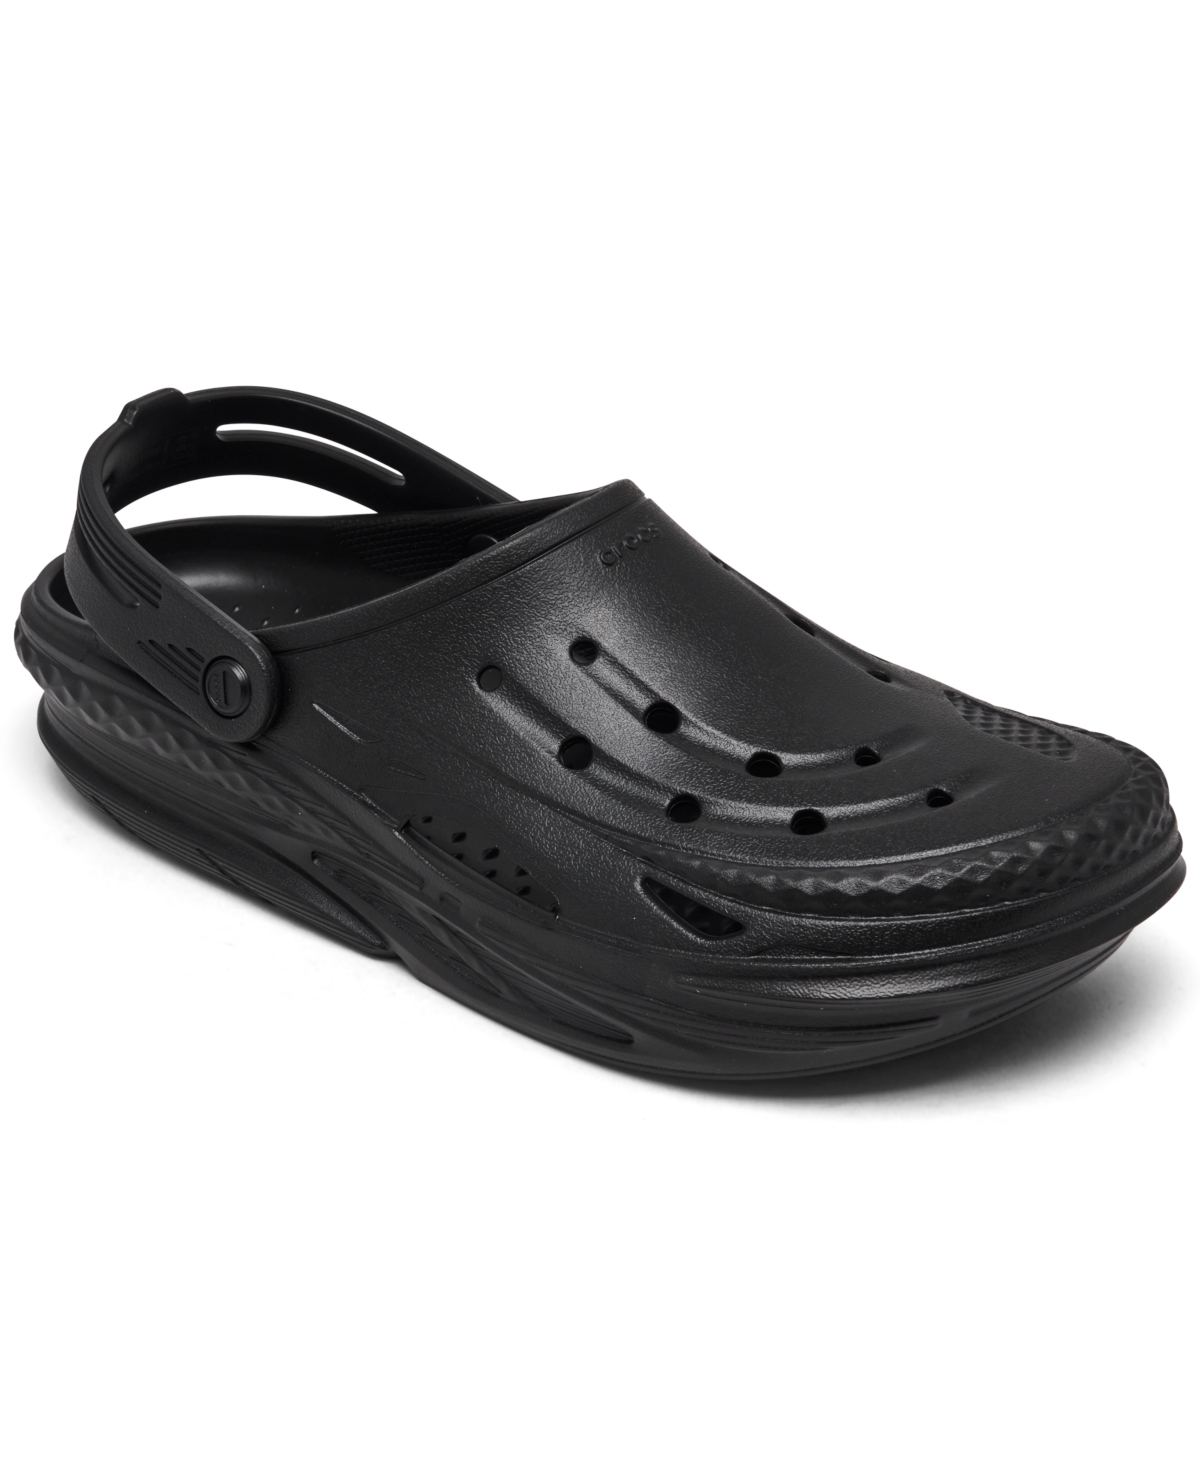 Men's Off Grid Comfort Casual Clogs from Finish Line - Blk